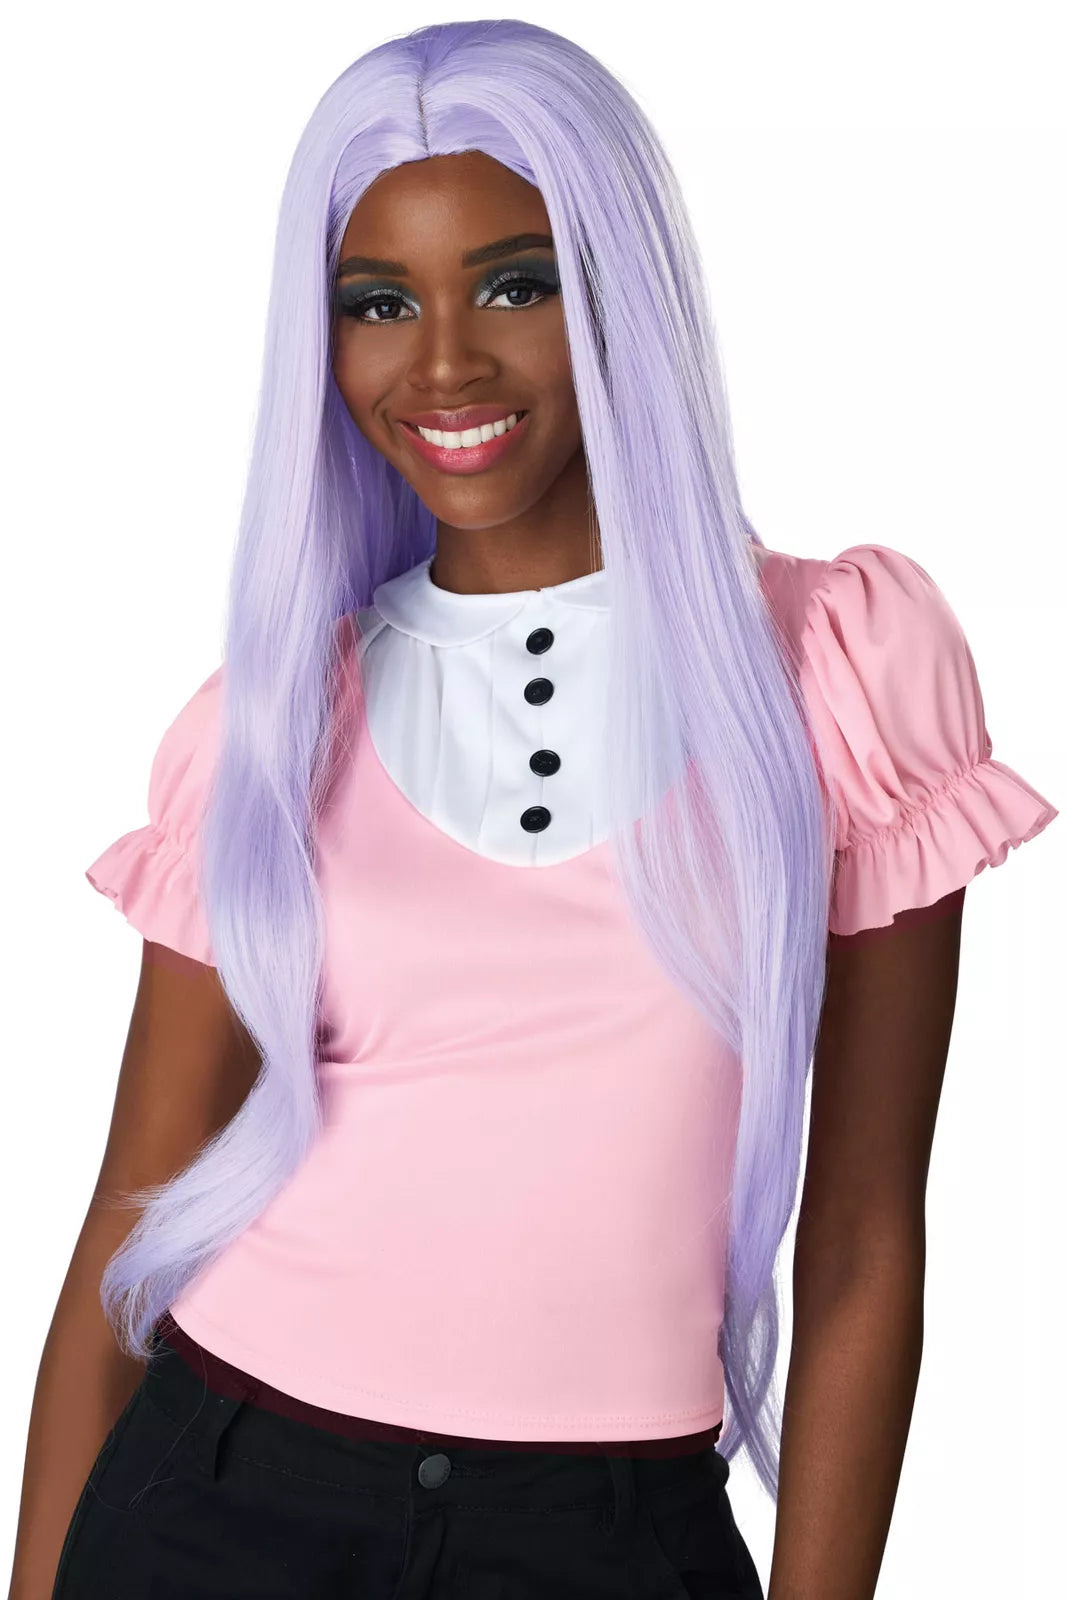 XL Cosplay Wig Teal, Pink, and Lavender